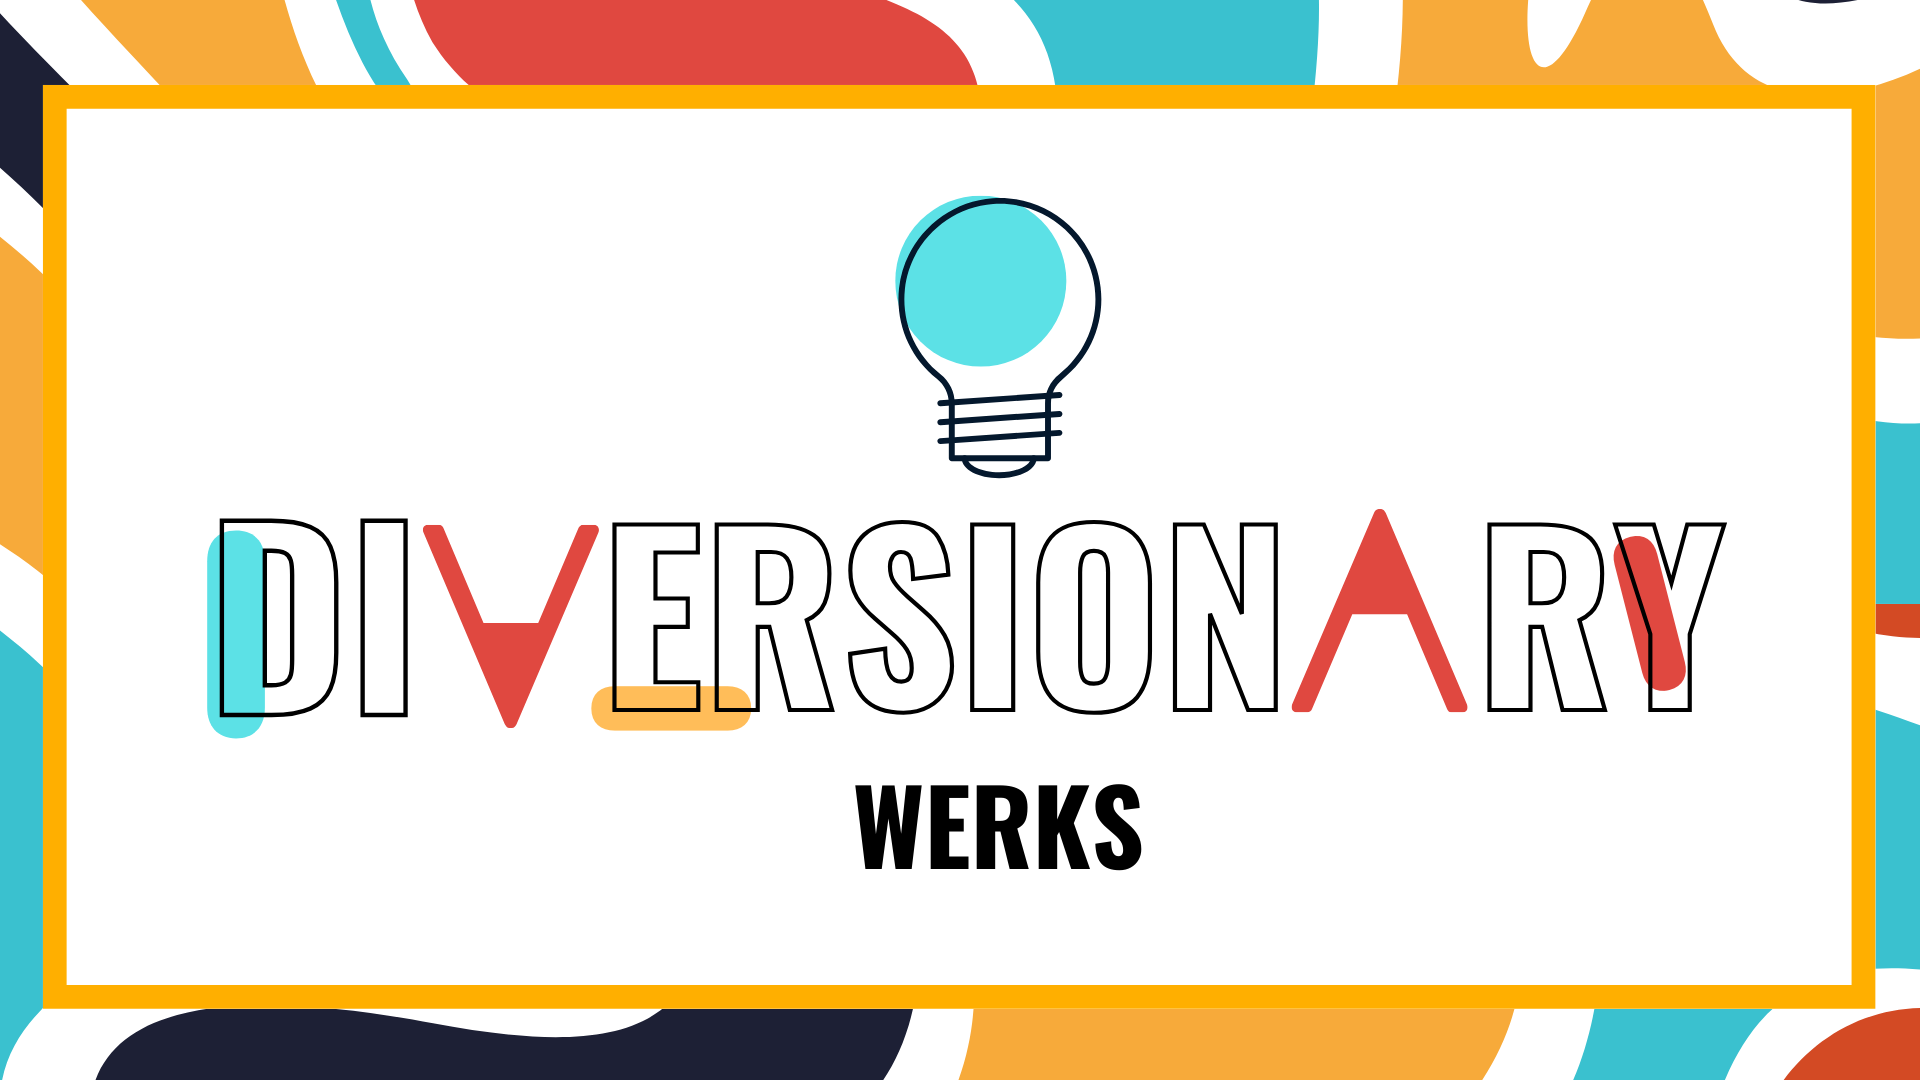 Diversionary Werks logo with a light blue, teal, titian, gold, and deap sea color squiggles as the background